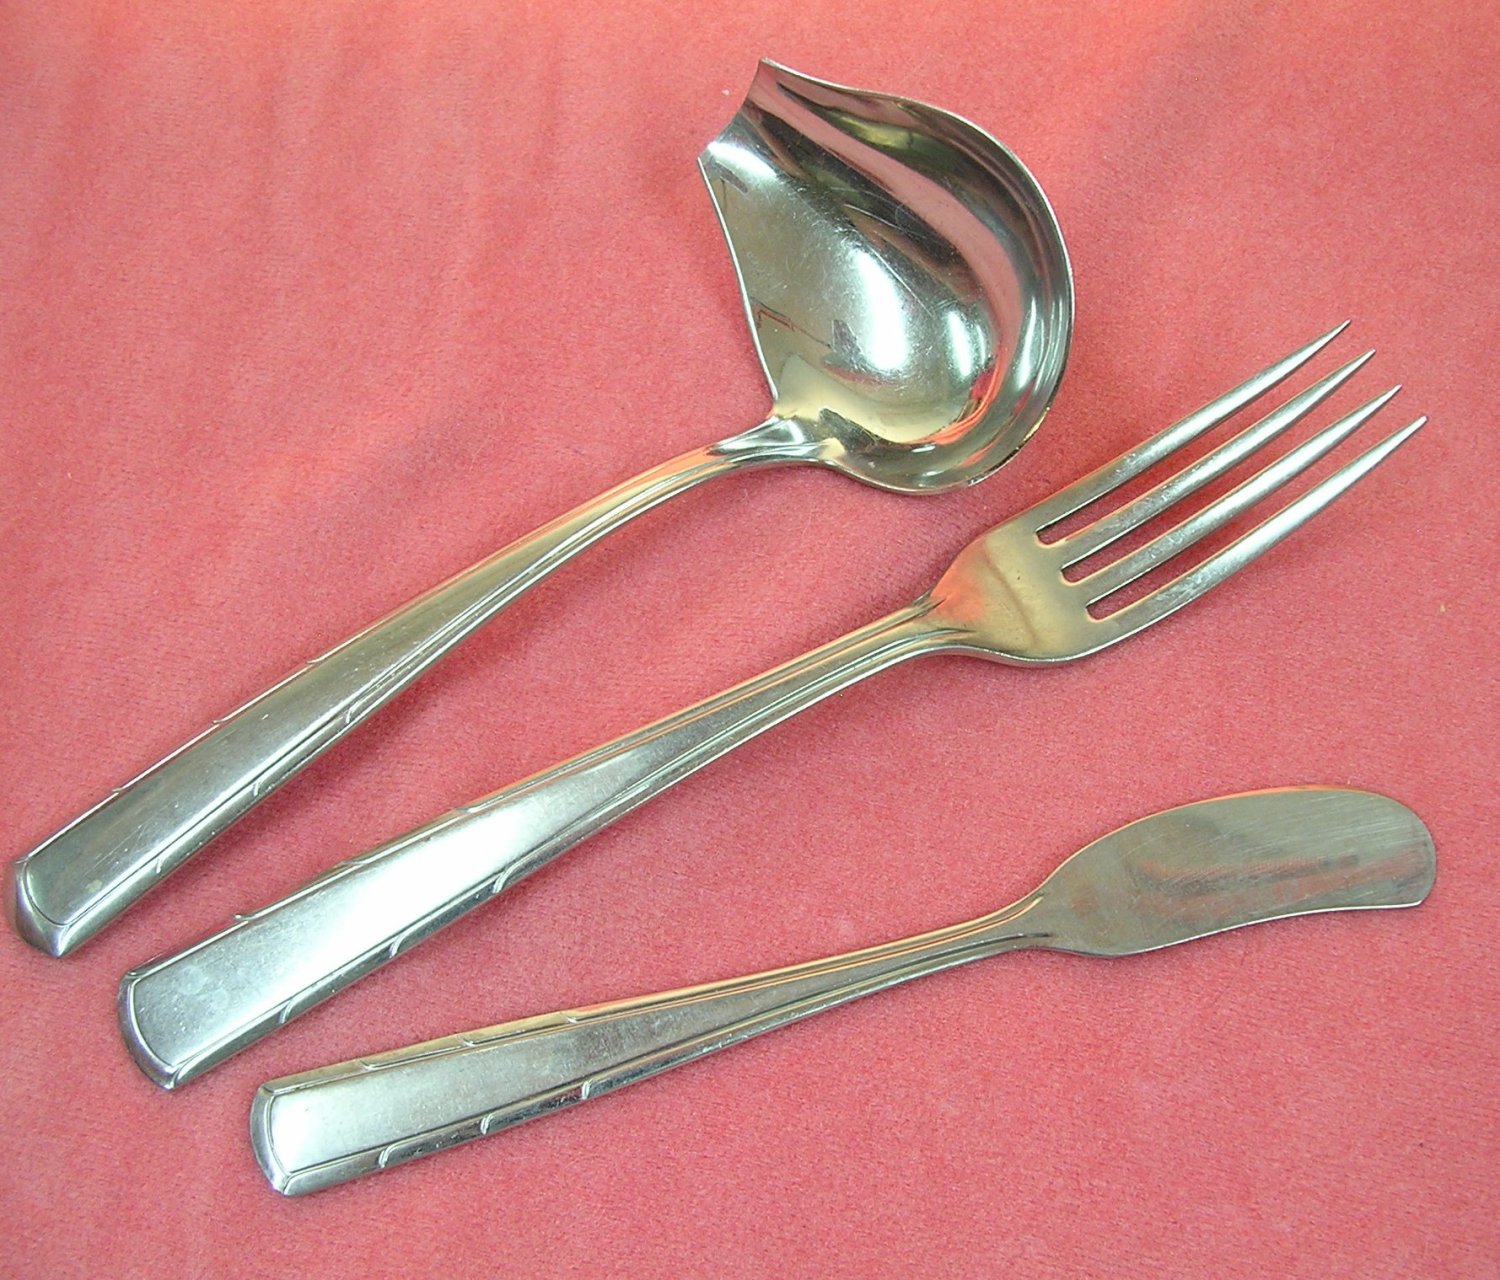 IMPERIAL LADY DUFF 3pc STAINLESS FLATWARE SILVERWARE